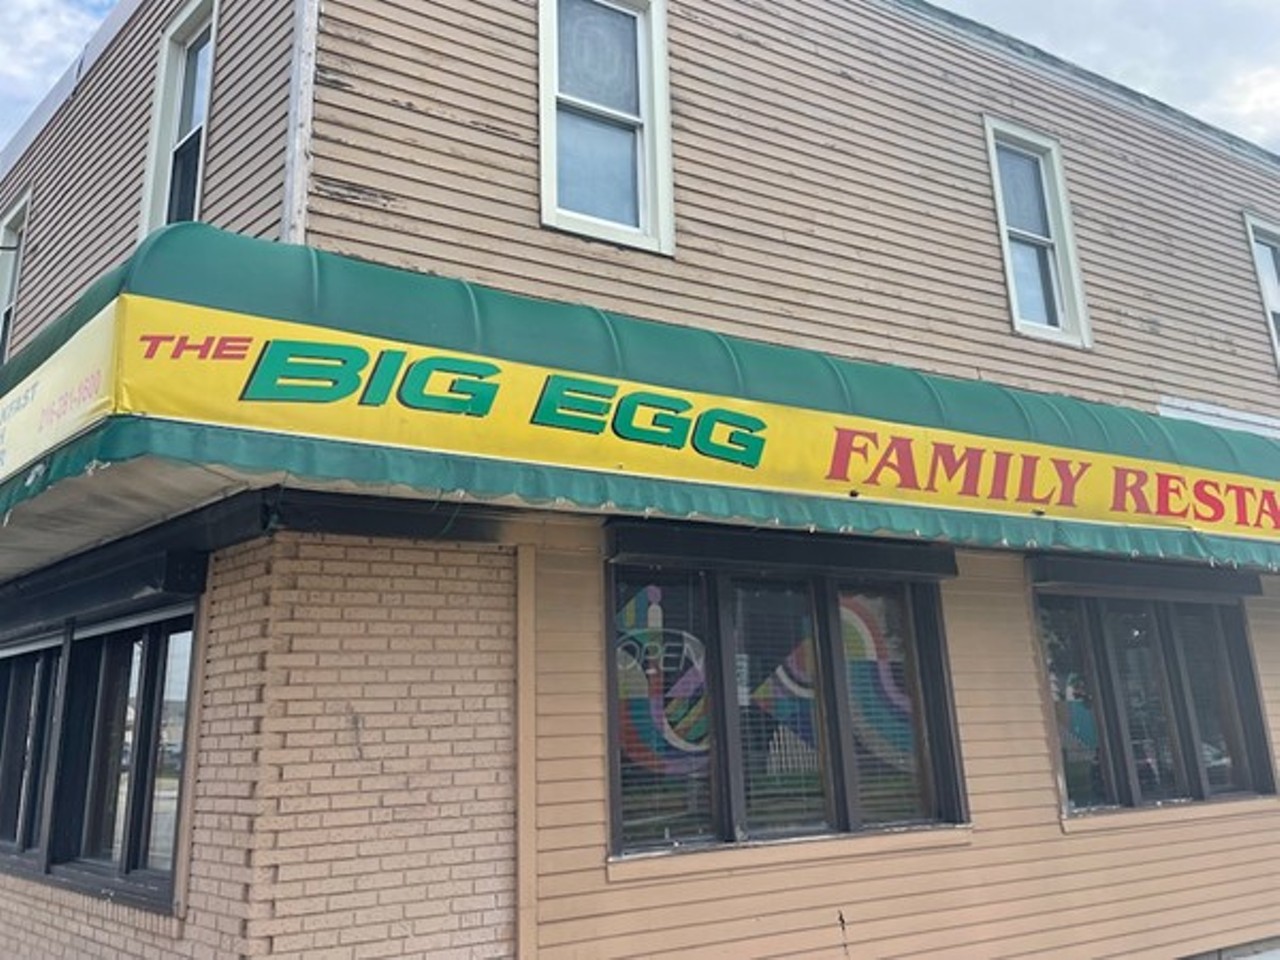  The Big Egg
5107 Detroit Ave., Cleveland
The Big Egg, the legendary once-24/7 diner at West 52nd and Detroit, permanently closed this October. Enjoying two distinct lives &#151; one as the original, beloved greasy spoon with as many devotees as health code violations that closed in 2002, and the second iteration, opened some seven years later with a fresh interior redo and little carried over from its first life other than the name and egg-shaped menu &#151; the Big Egg had been a part of the near west side since at least the early 1950s.